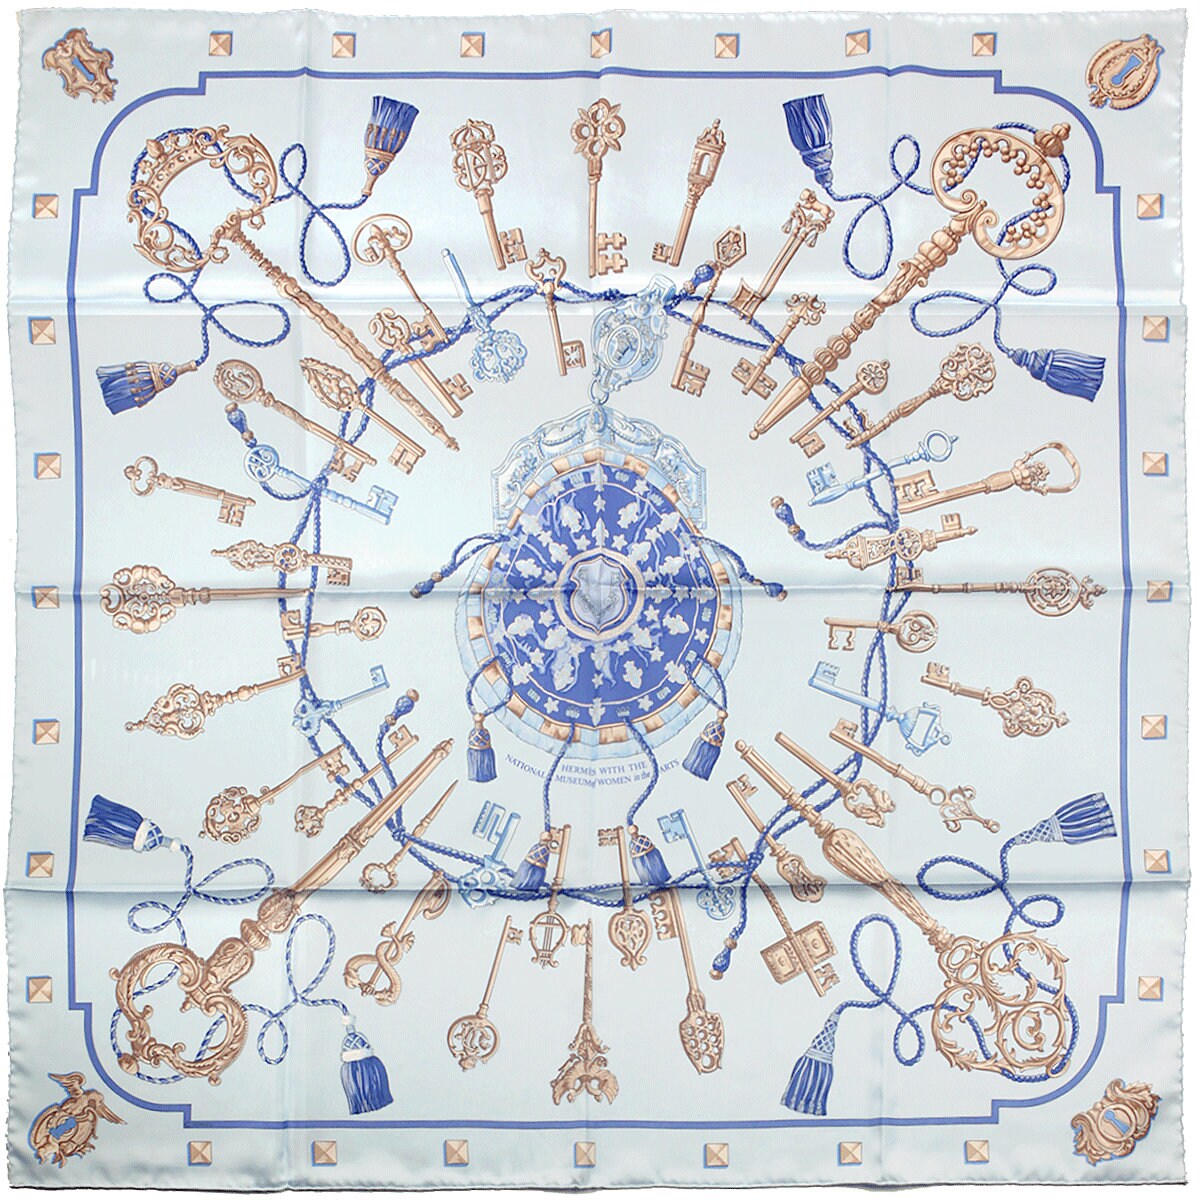 Hermes Scarf "Les Cles" for the National Museum of Women in the Arts by Caty Latham 90cm Silk | Very Rare